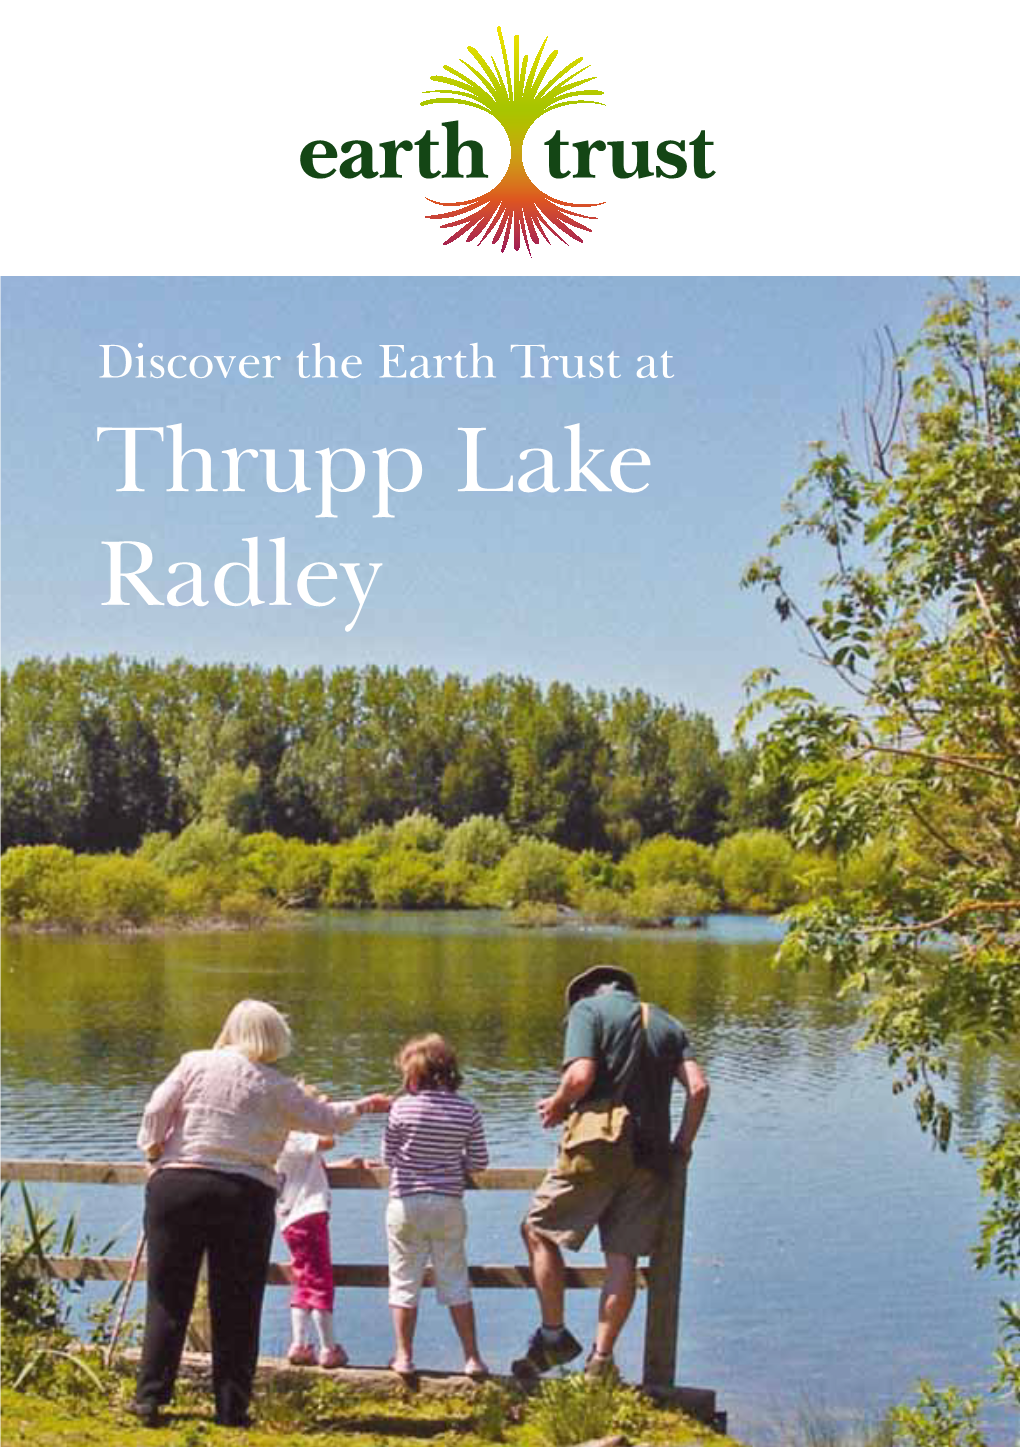 Thrupp Lake Radley Welcome to Thrupp Lake, Radley This Corner Is a Great Map Key a Beautiful Lake with Fabulous Views and an Easy Walking Trail